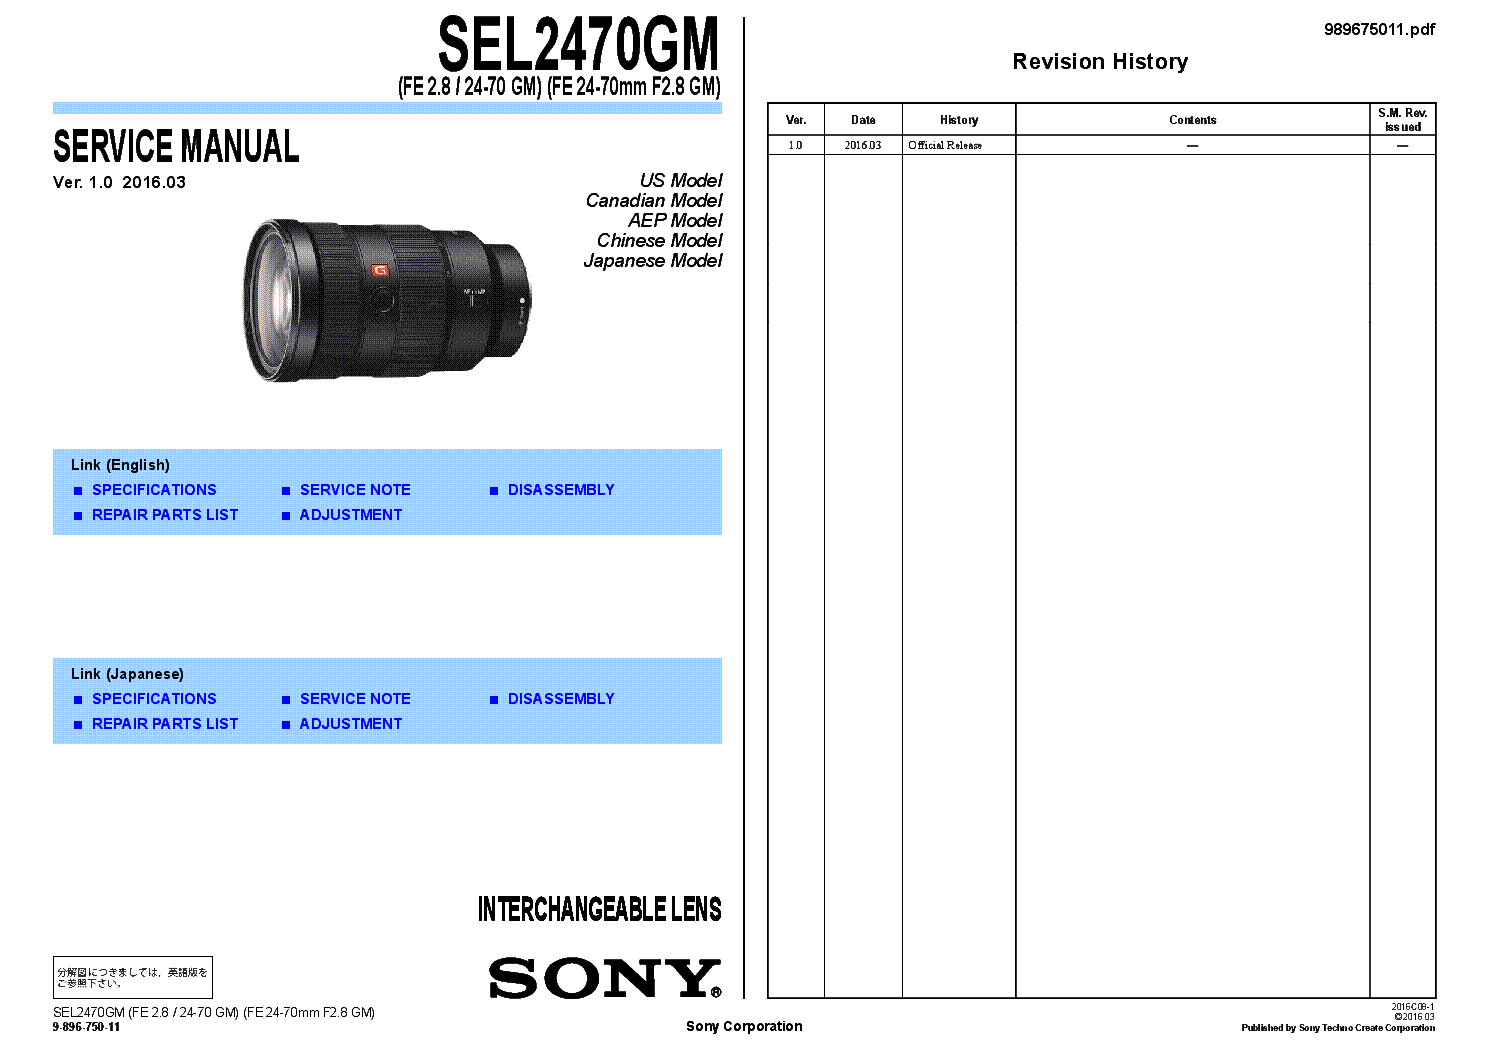 SONY SEL2470GM SM Service Manual for electronics download, info repair eeprom, schematics, experts